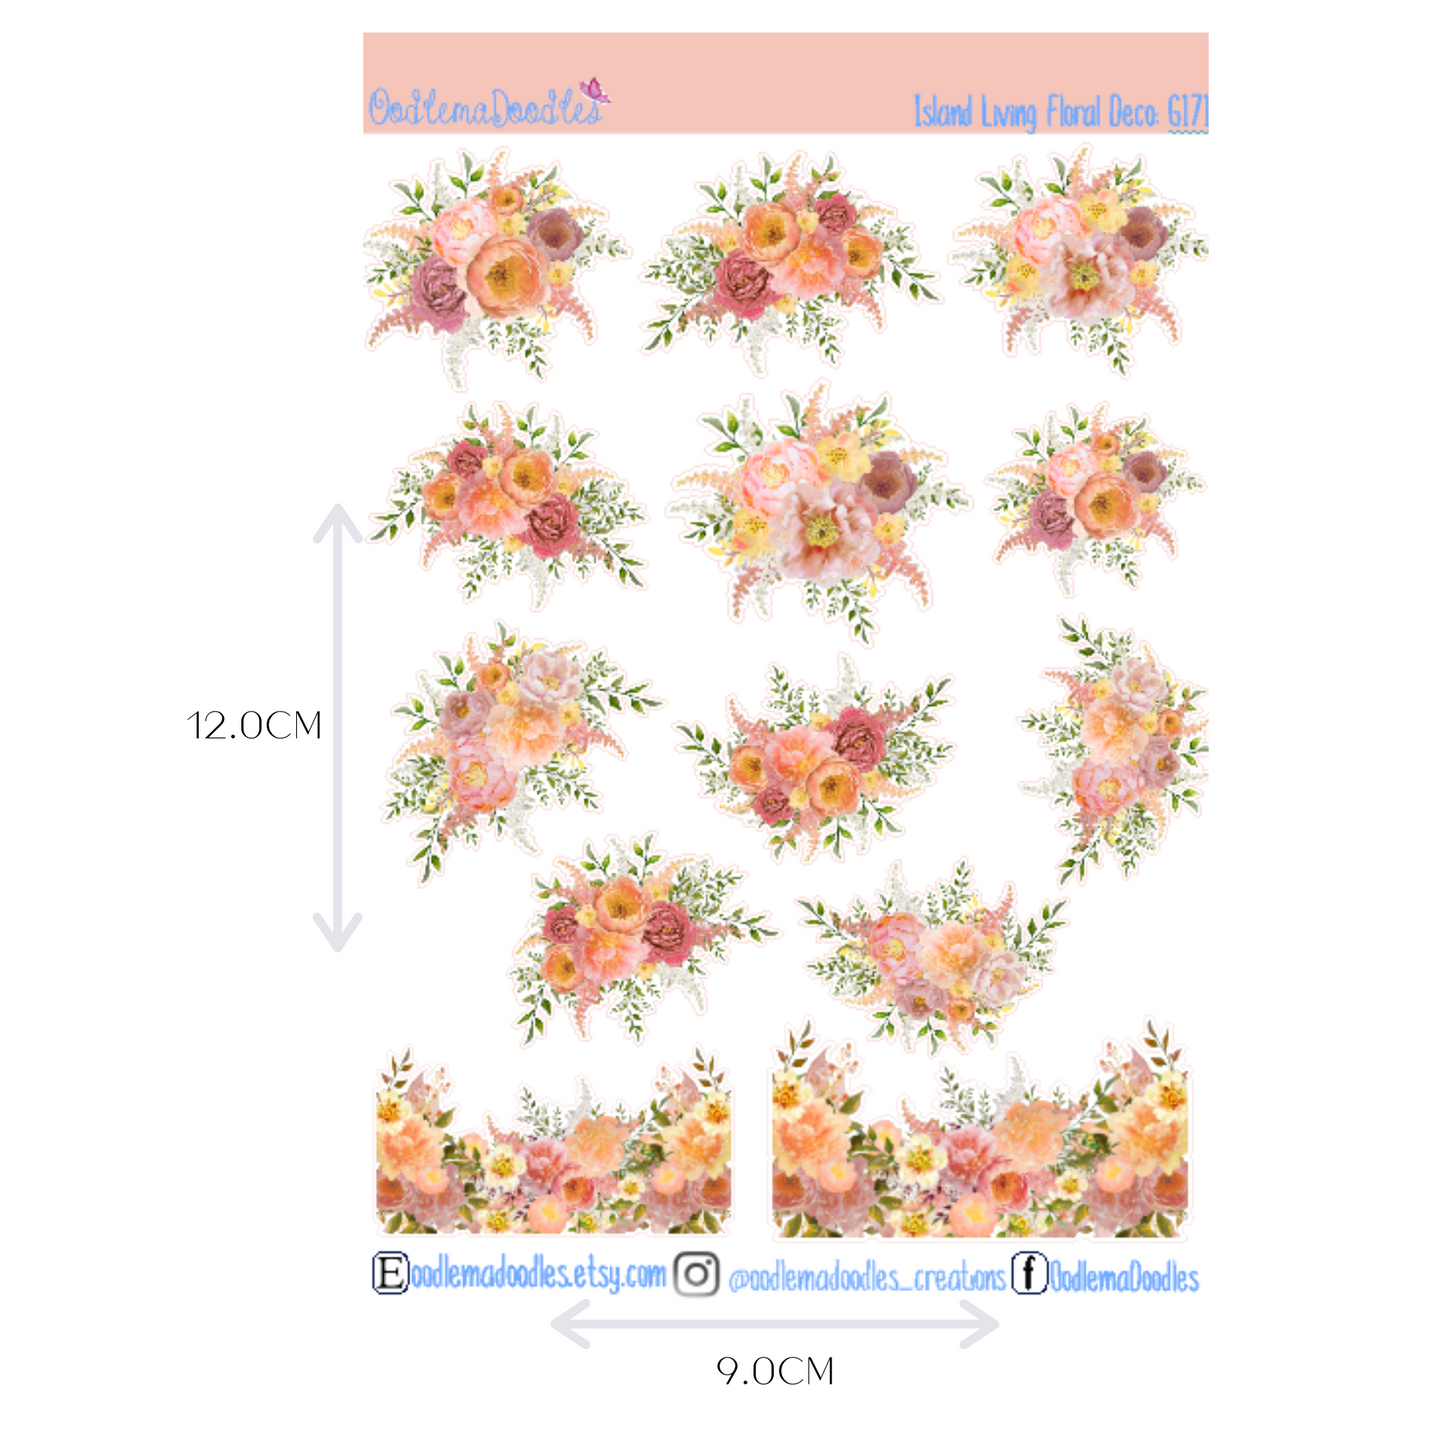 Island Dreaming Floral Decorative Stickers